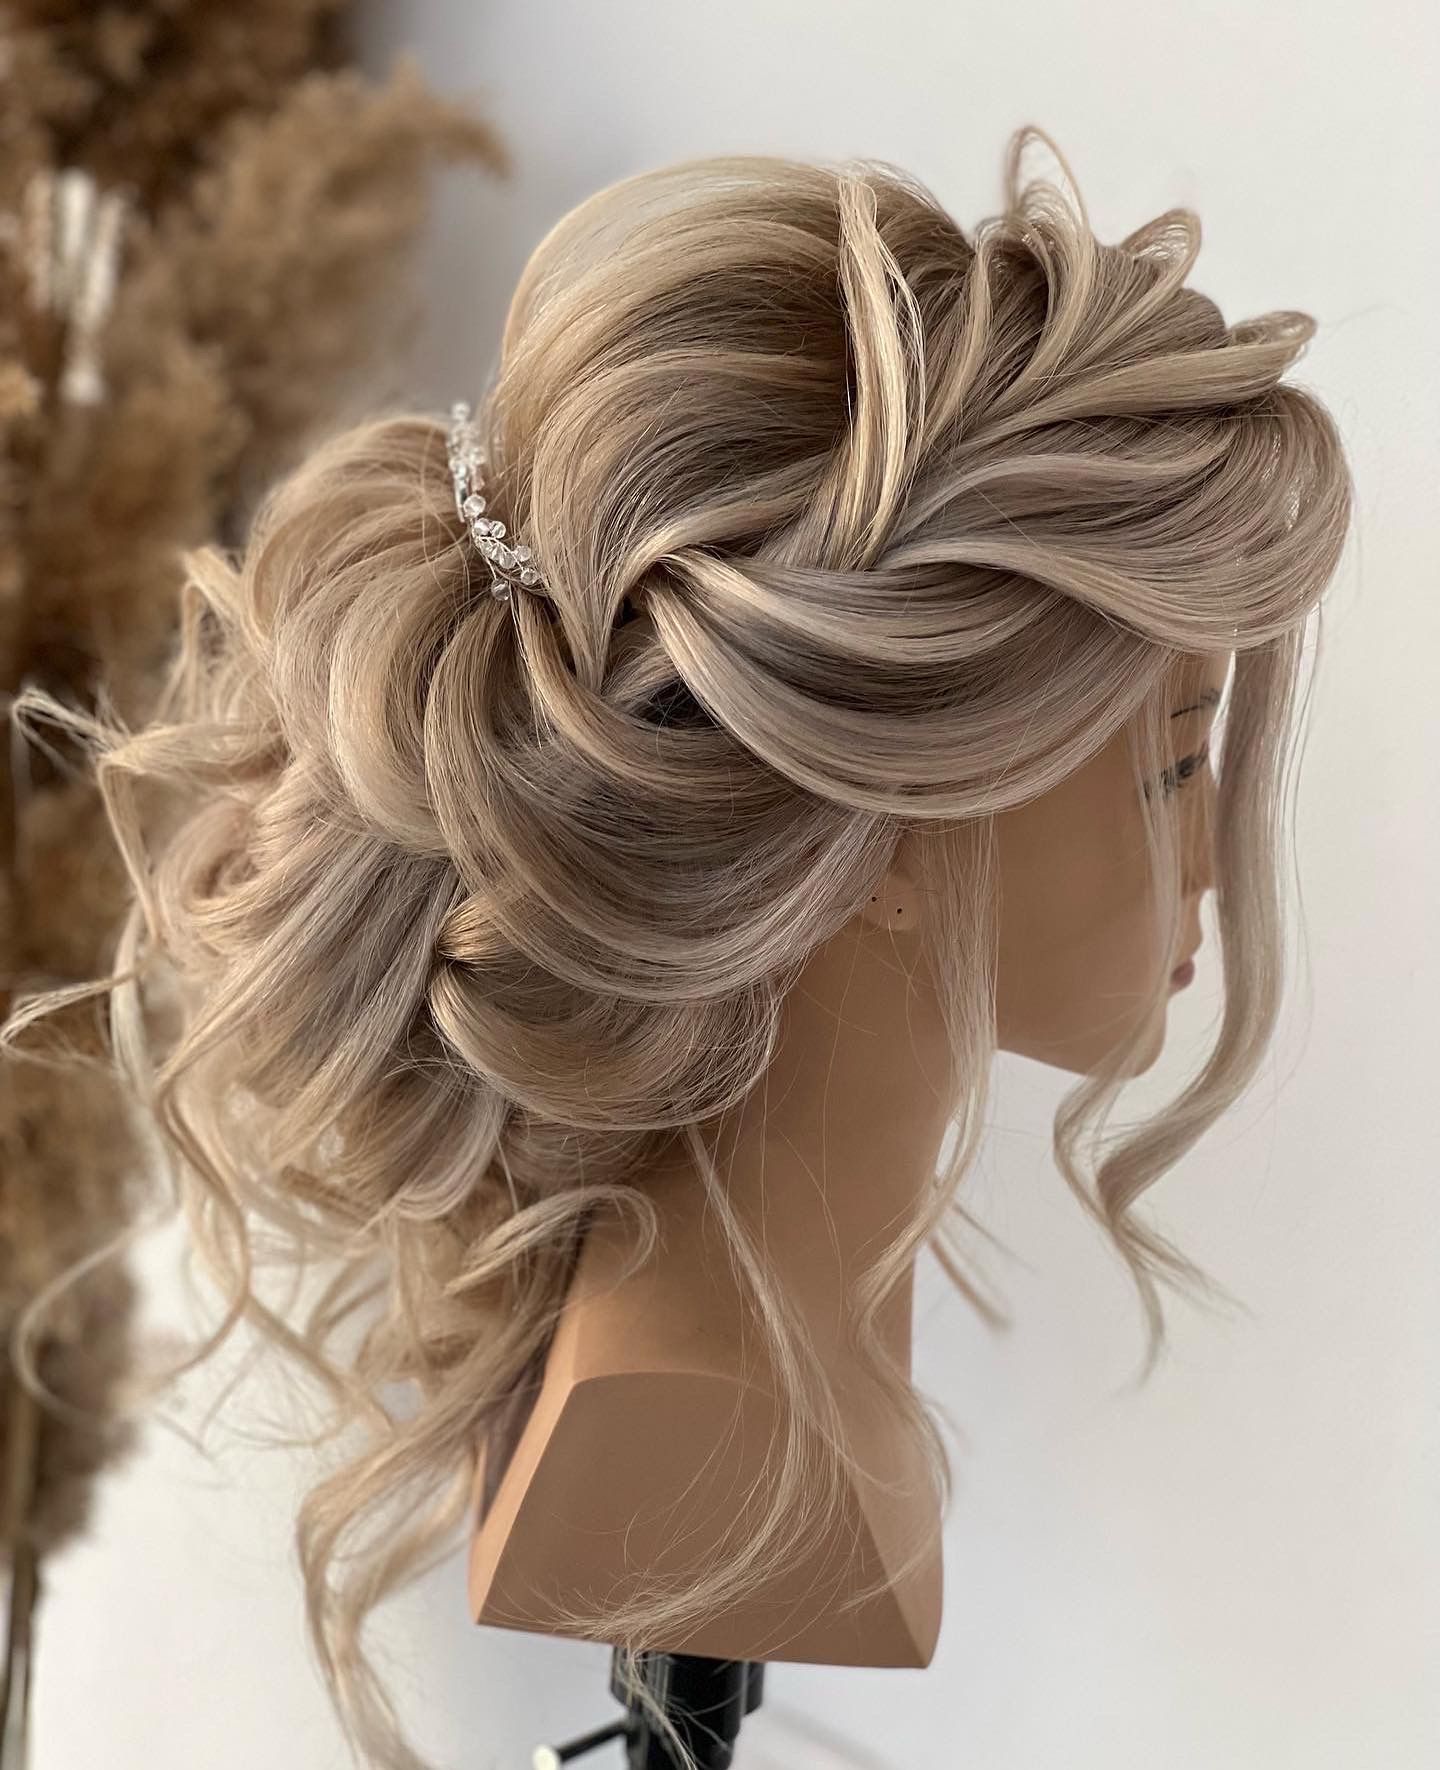 Stunning Wedding Hairstyles for Long Hair to Make You Feel Like a Princess